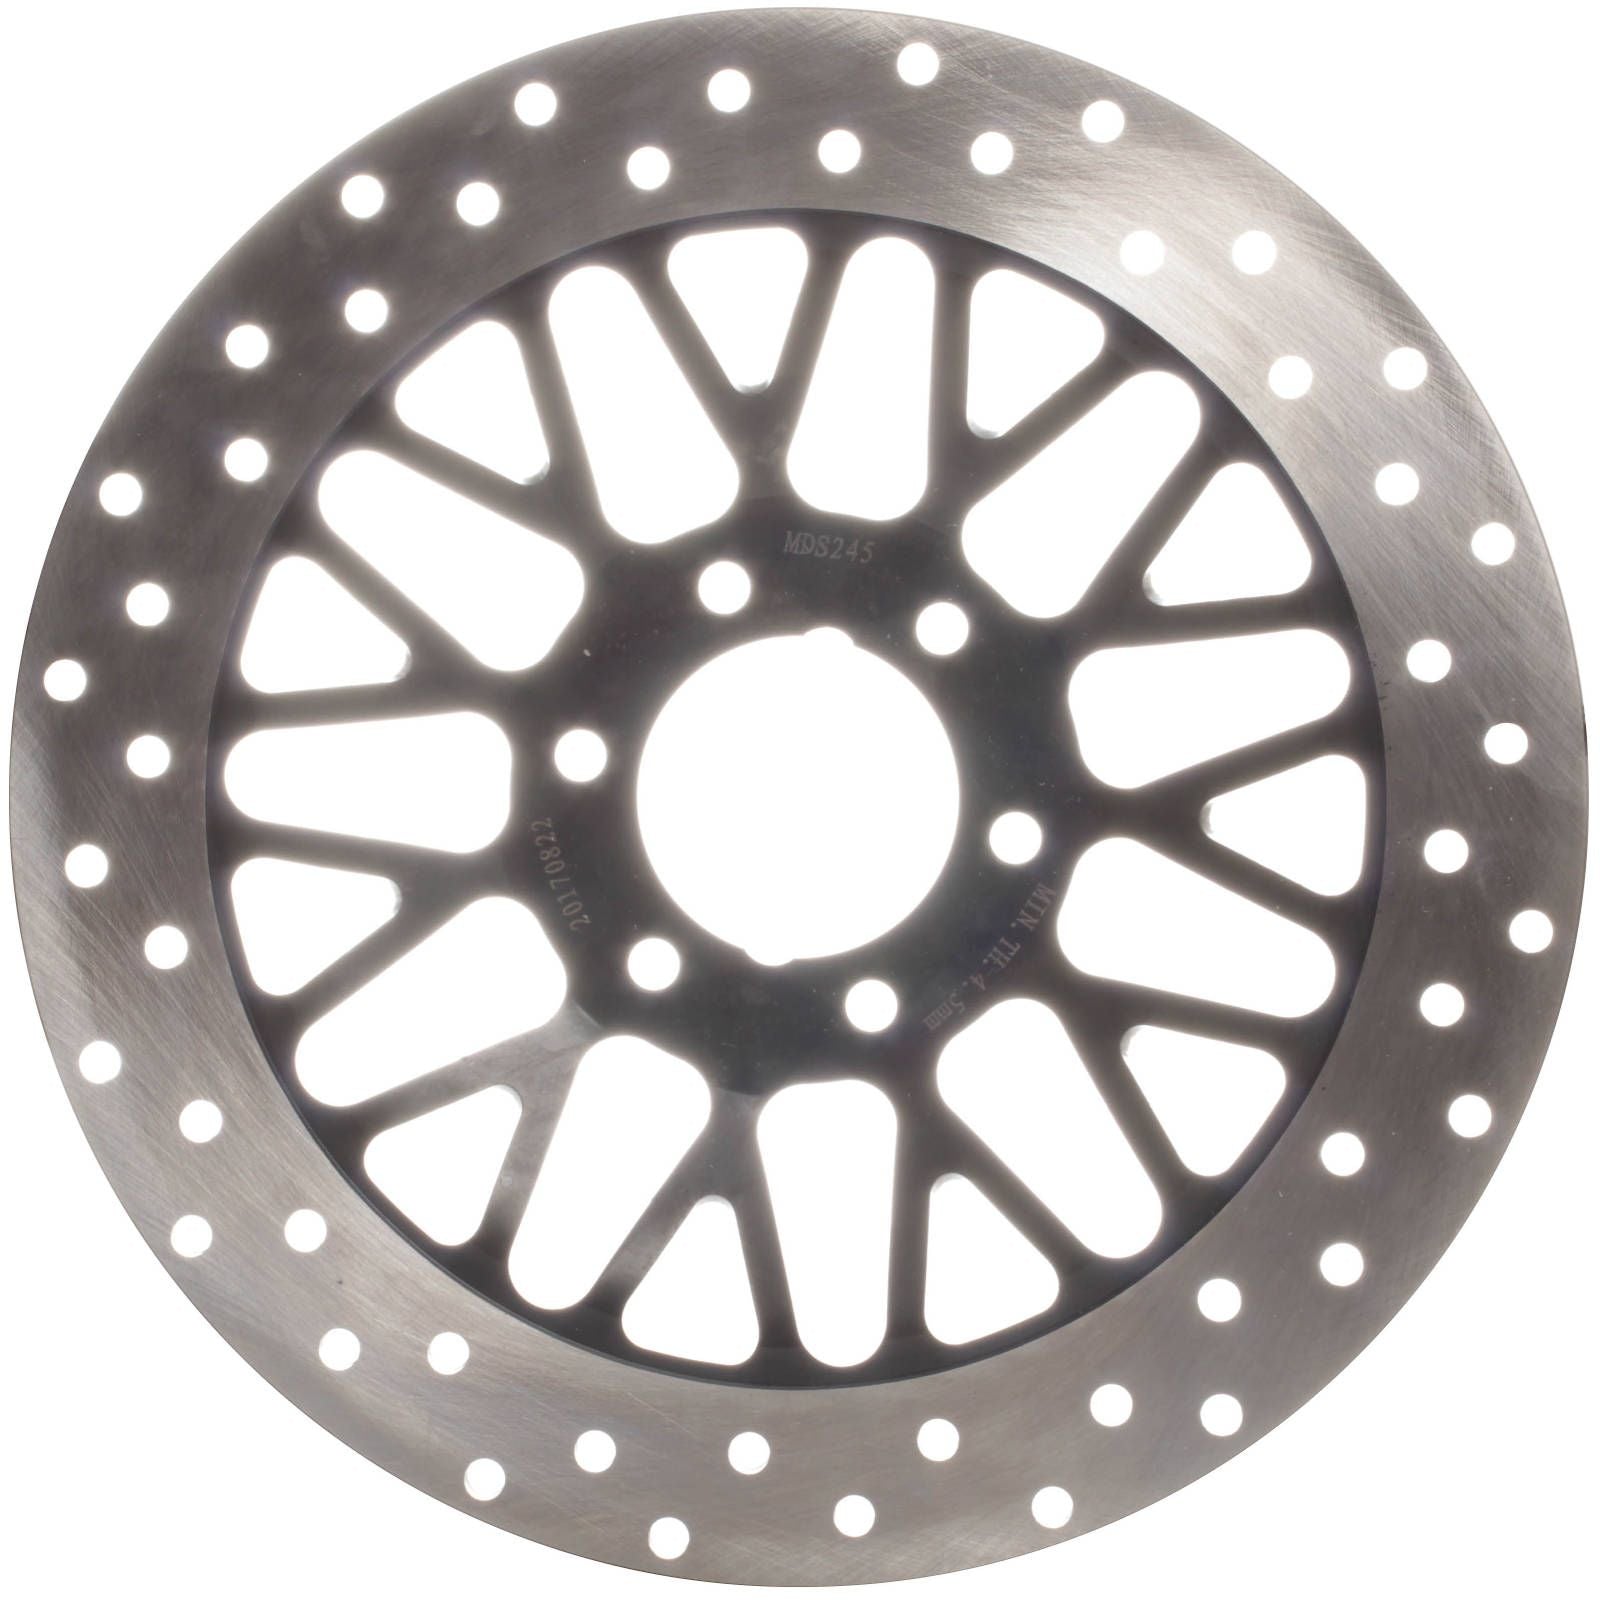 New MTX Brake Disc Rotor Solid Type - Front Right #MDS05033